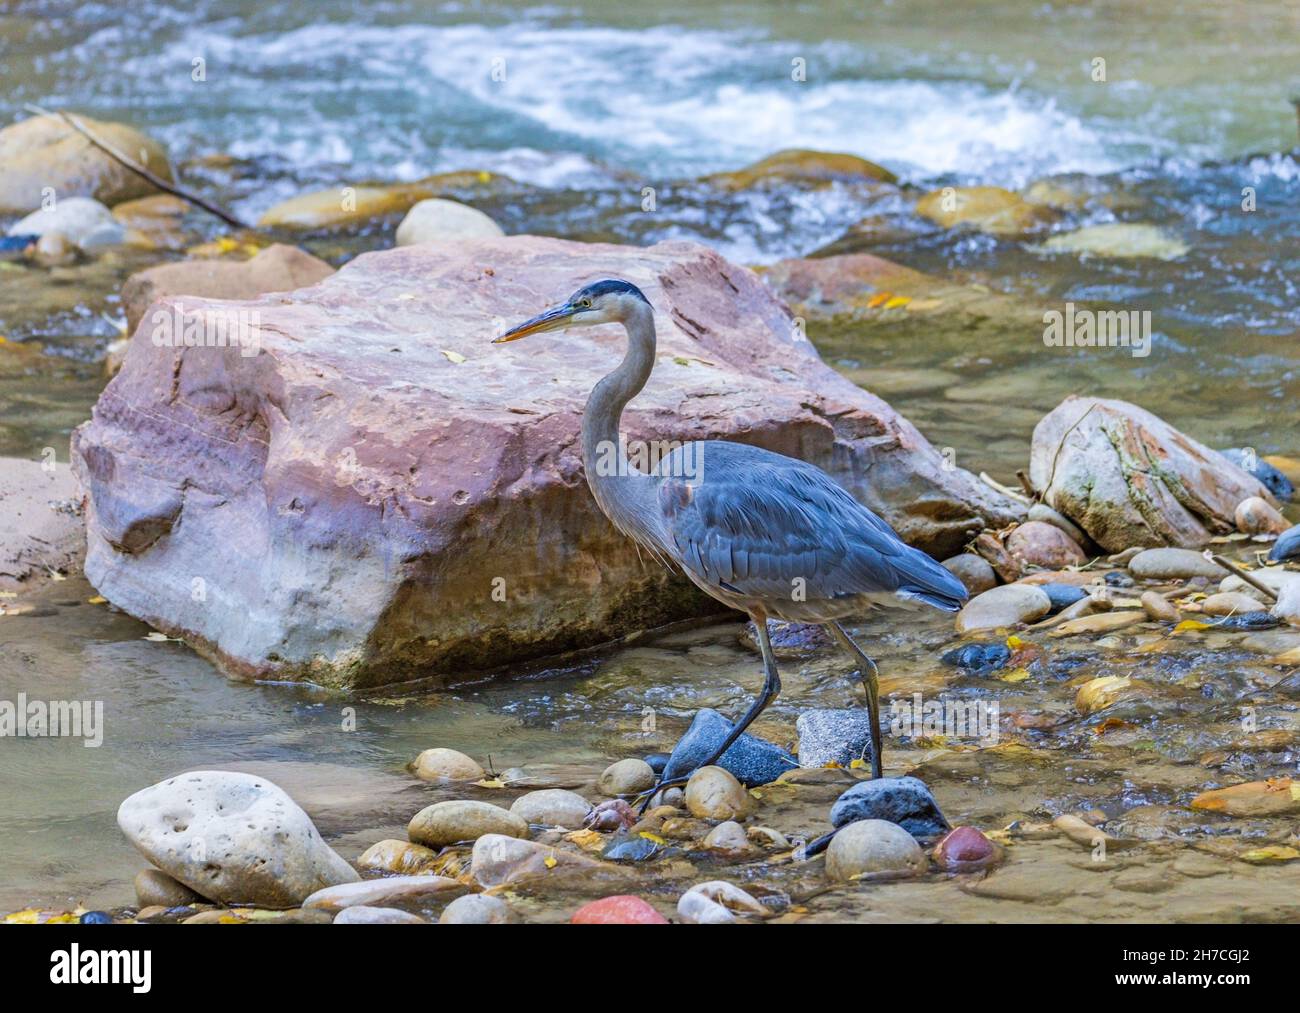 A Great Blue Heron (Ardea herodias) walks along in search of fish in the North Fork of the Virgin River in Zion National Park, Springdale, Utah, USA. Stock Photo